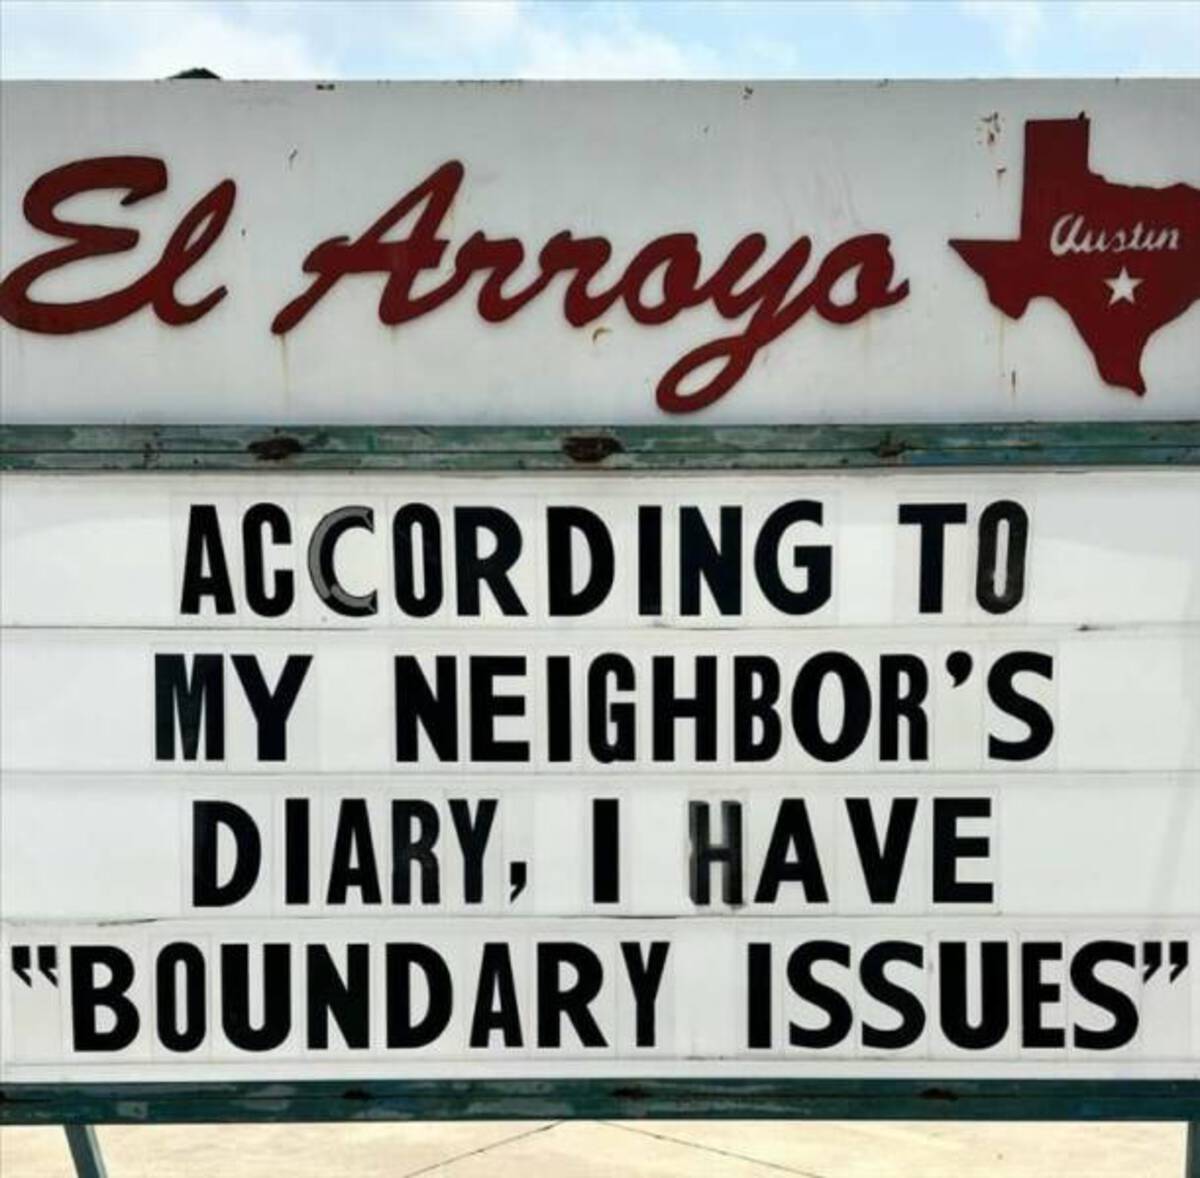 signage - El Arroyo According To Austin My Neighbor'S Diary, I Have "Boundary Issues"